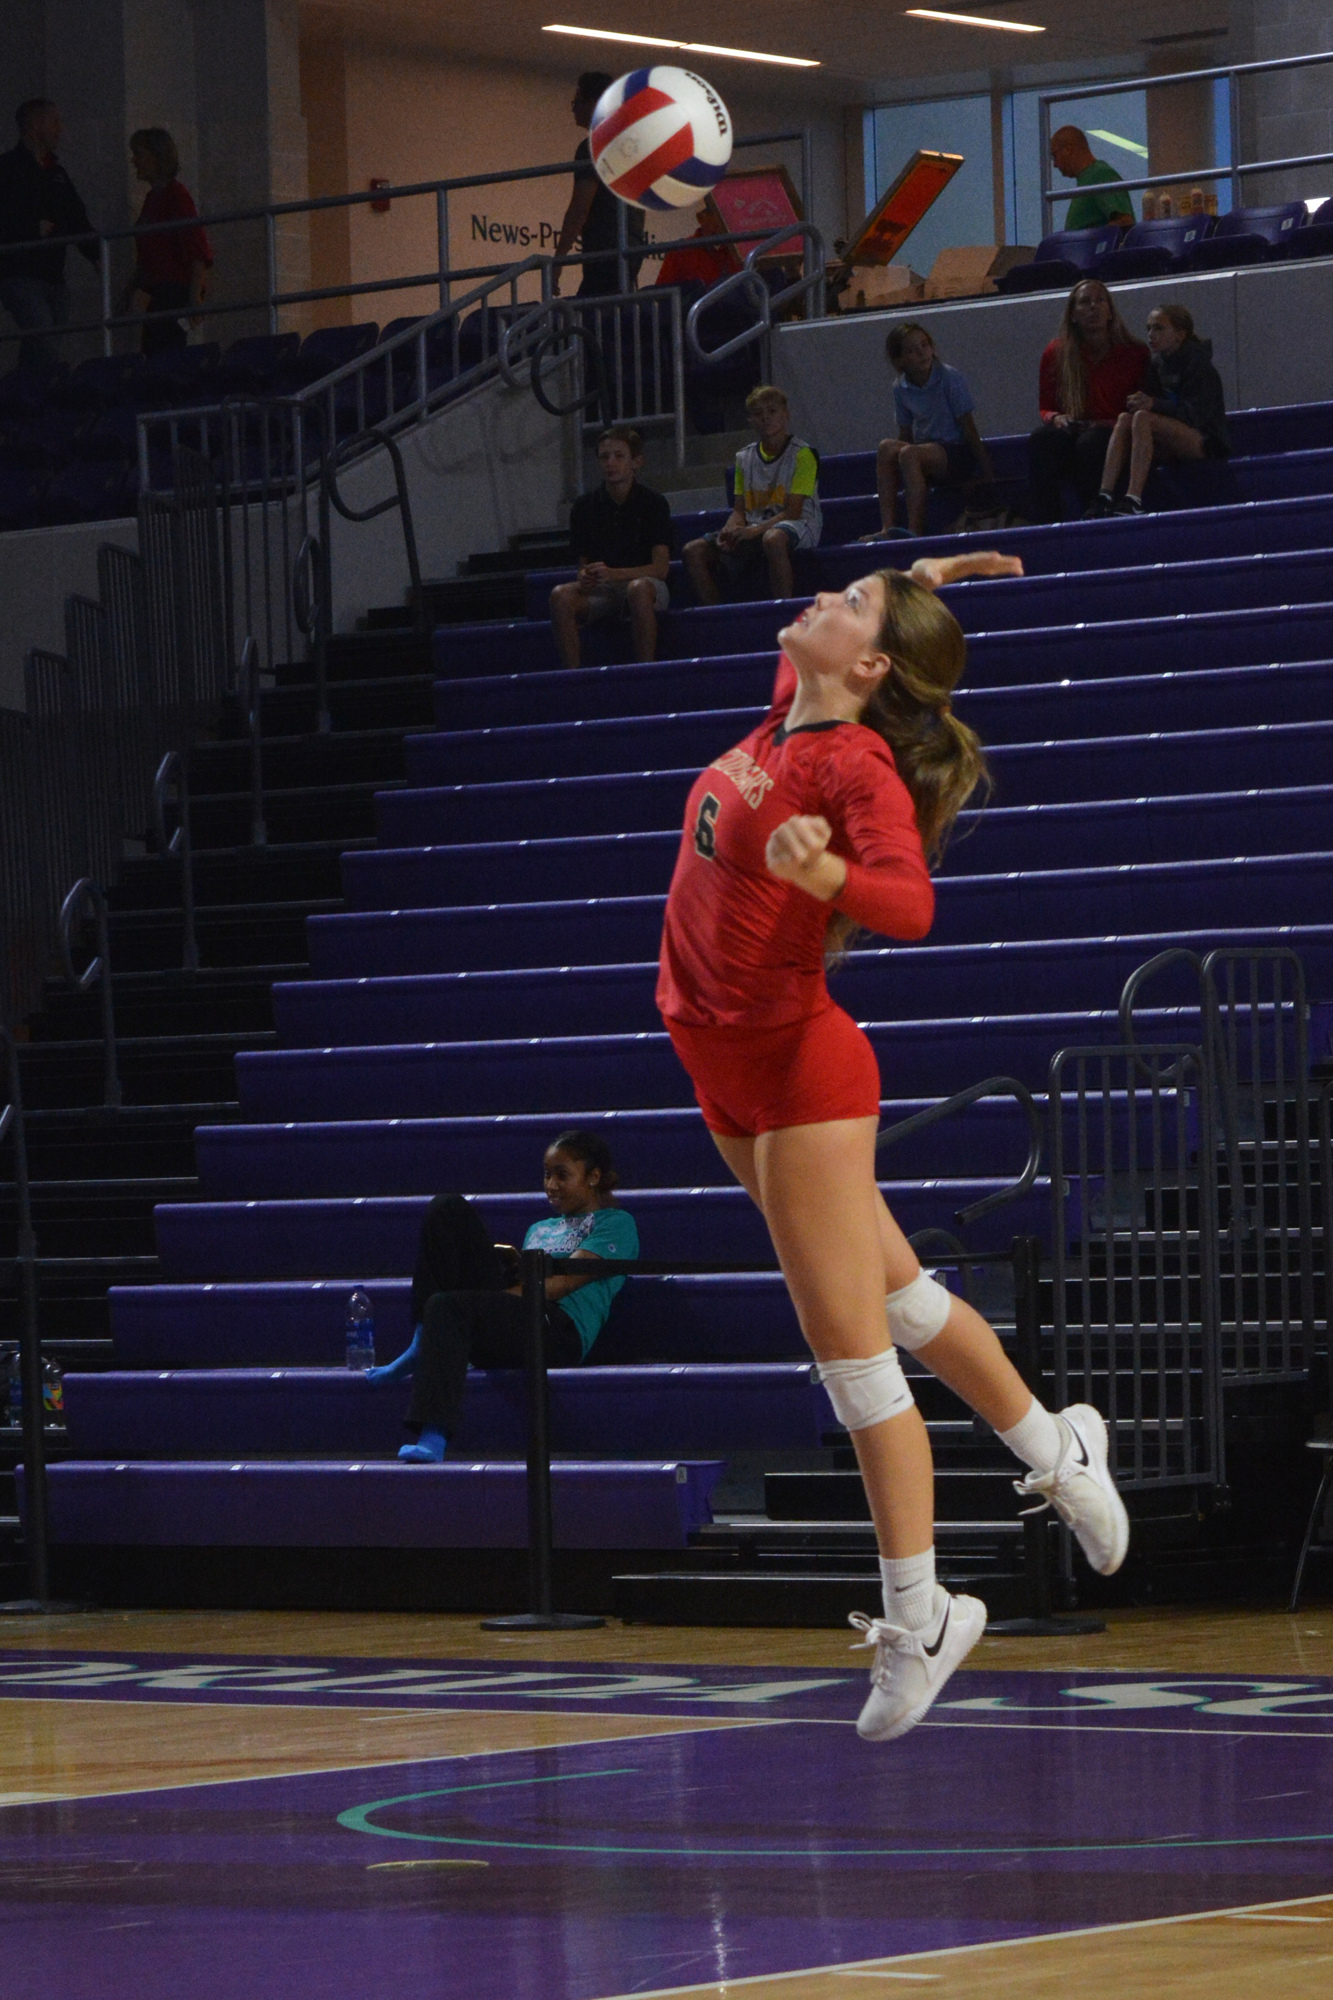 4. Cougars senior Kali Plattner crushes a serve attempt in the state championship game. Cardinal Mooney reached the championship for the first time in program history.